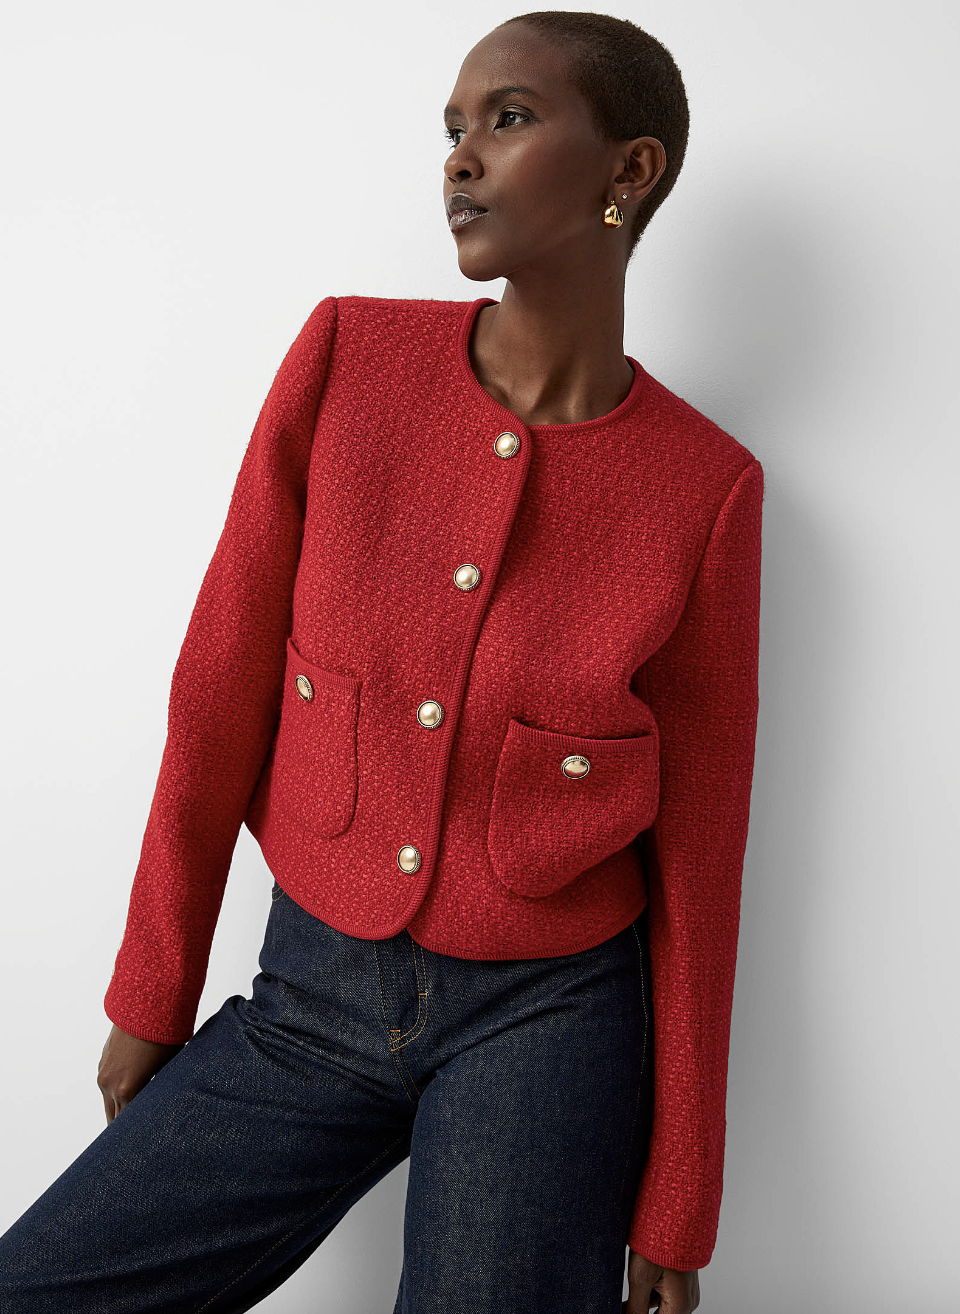 black model with short hair wearing dark jeans and Contemporaine Cropped Bright Tweed Blazer in Red (Photo via Simons)